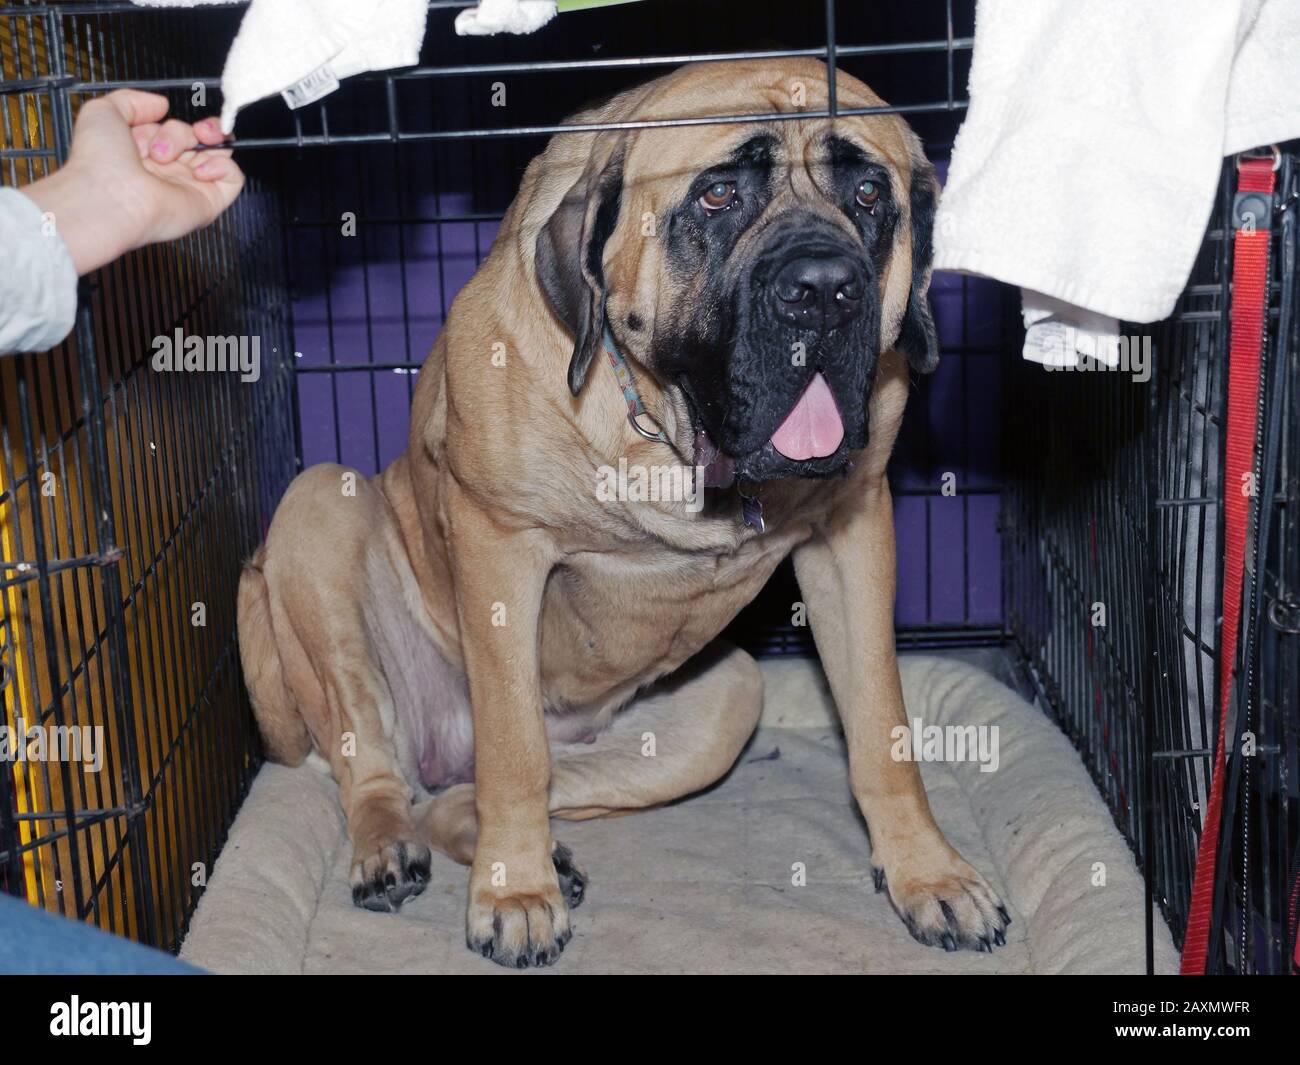 February 11, 2020, New York, New York, USA: Behind the scenes at the Westminster Dog Show 2020 in the grooming/benching area on Pier 94. Since 1877 mans best friend has been has been celebrated in the worlds greatest dog show promoting responsible dog ownership, health and breed preservation. (Credit Image: © Milo Hess/ZUMA Wire) Stock Photo